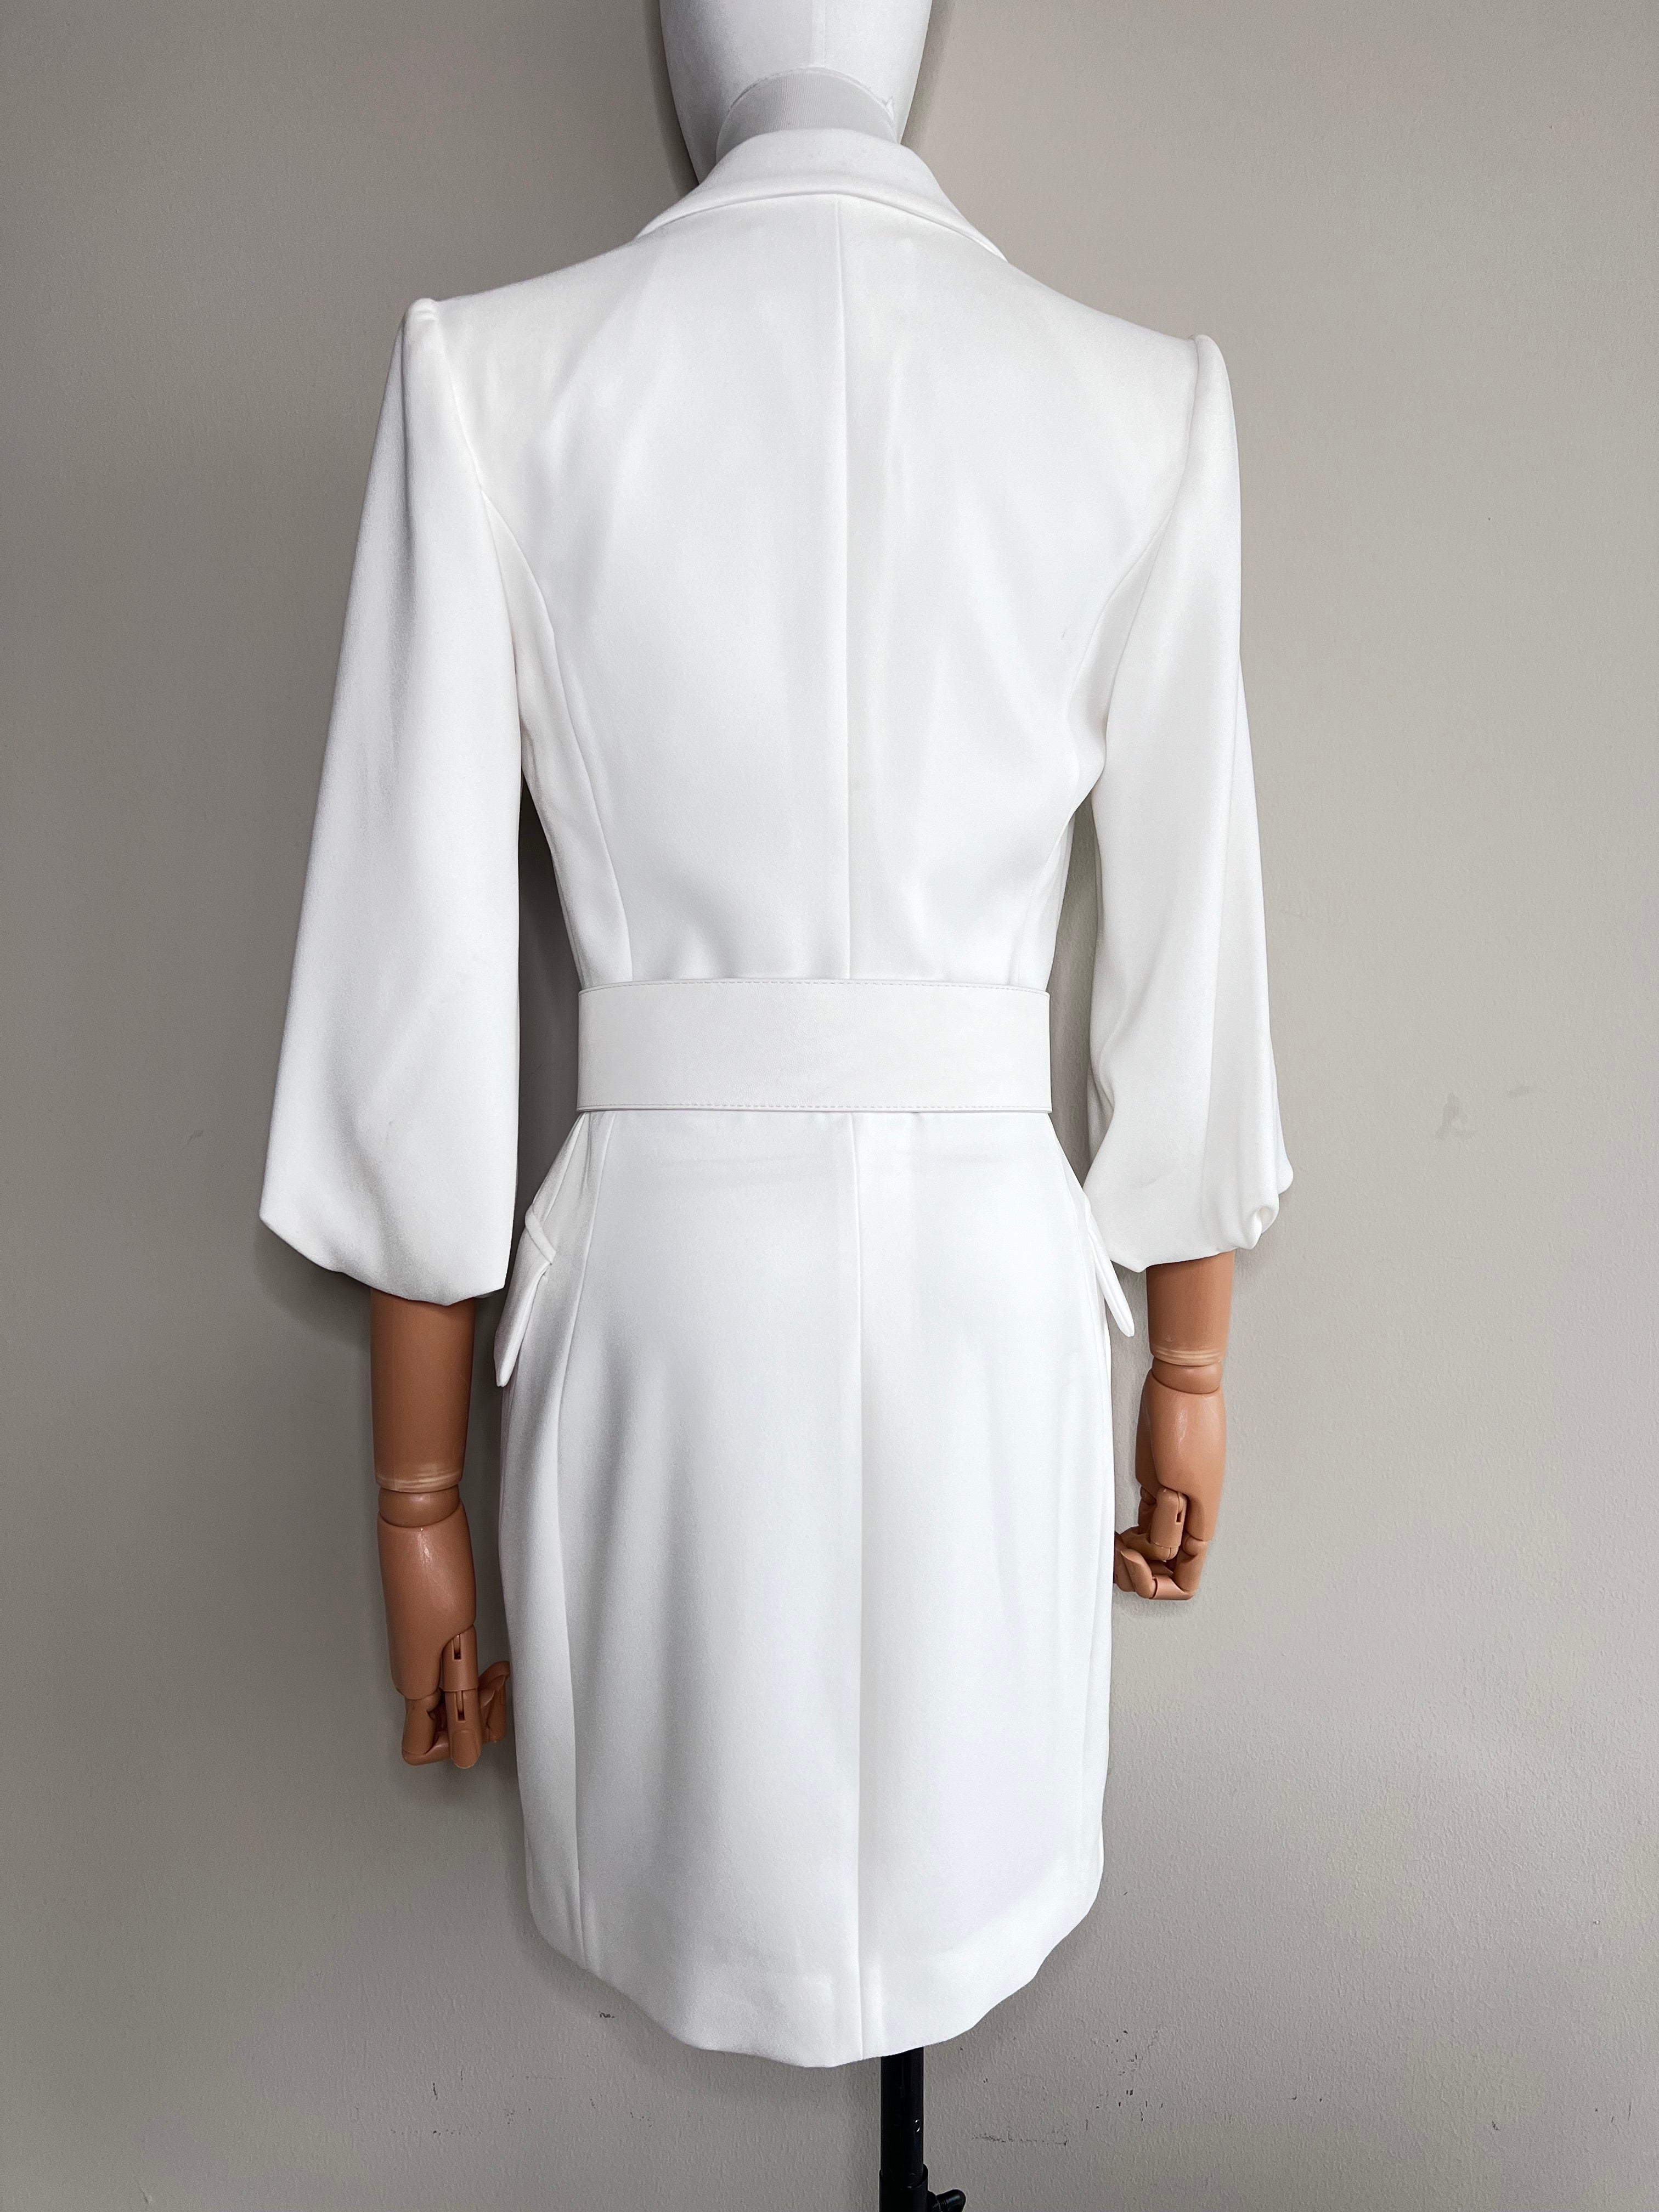 White double breasted long blazer suit dress belted - ELISABETTA FRANCHI